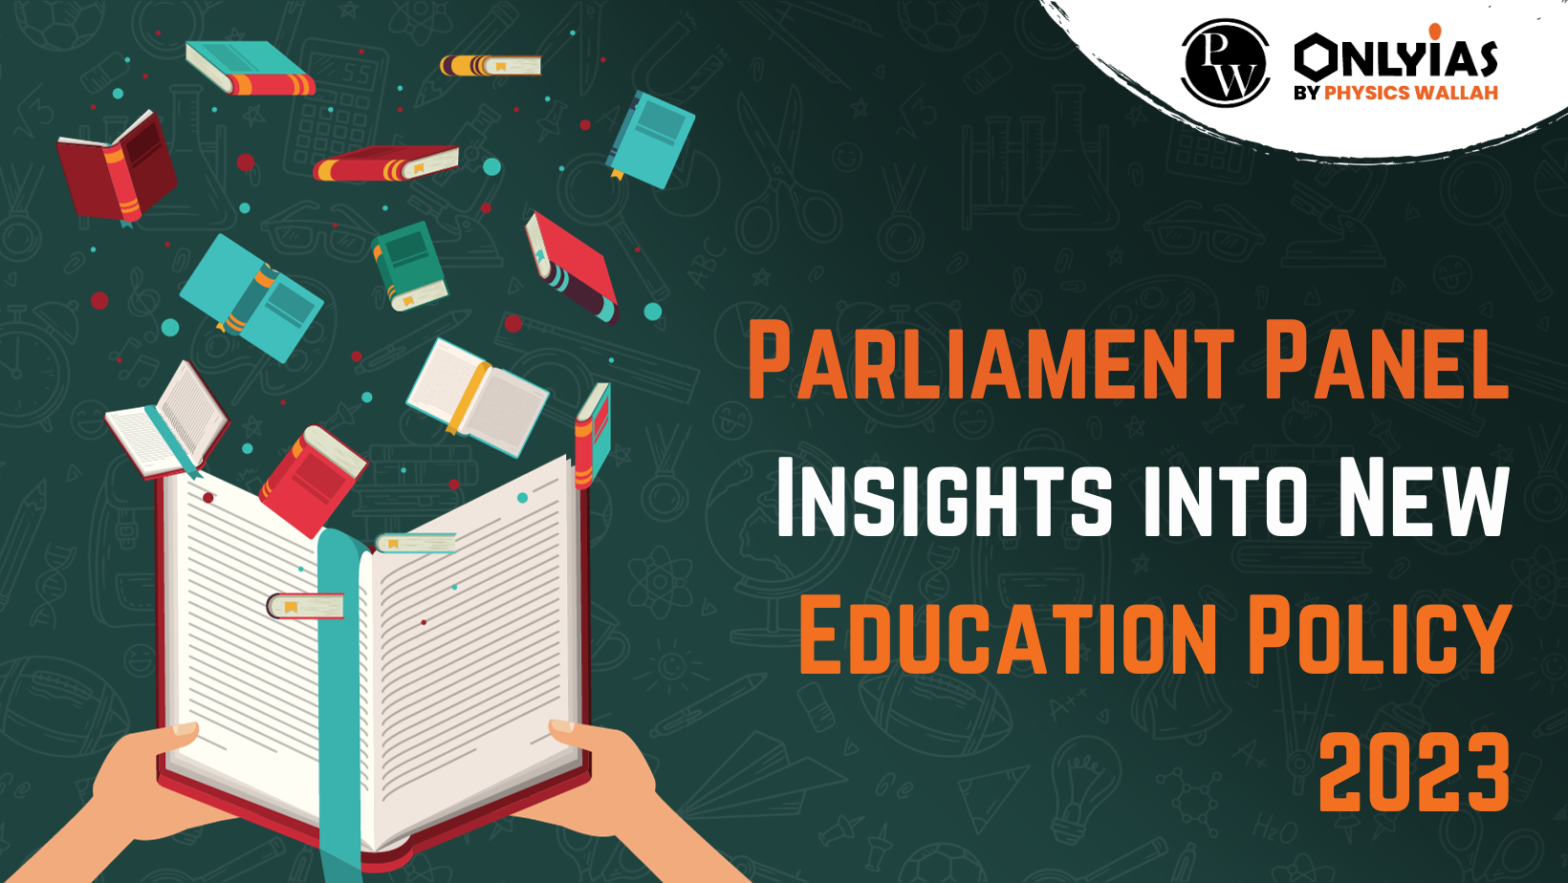 Parliament Panel Insights into New Education Policy 2023 | PWOnlyIAS 2023